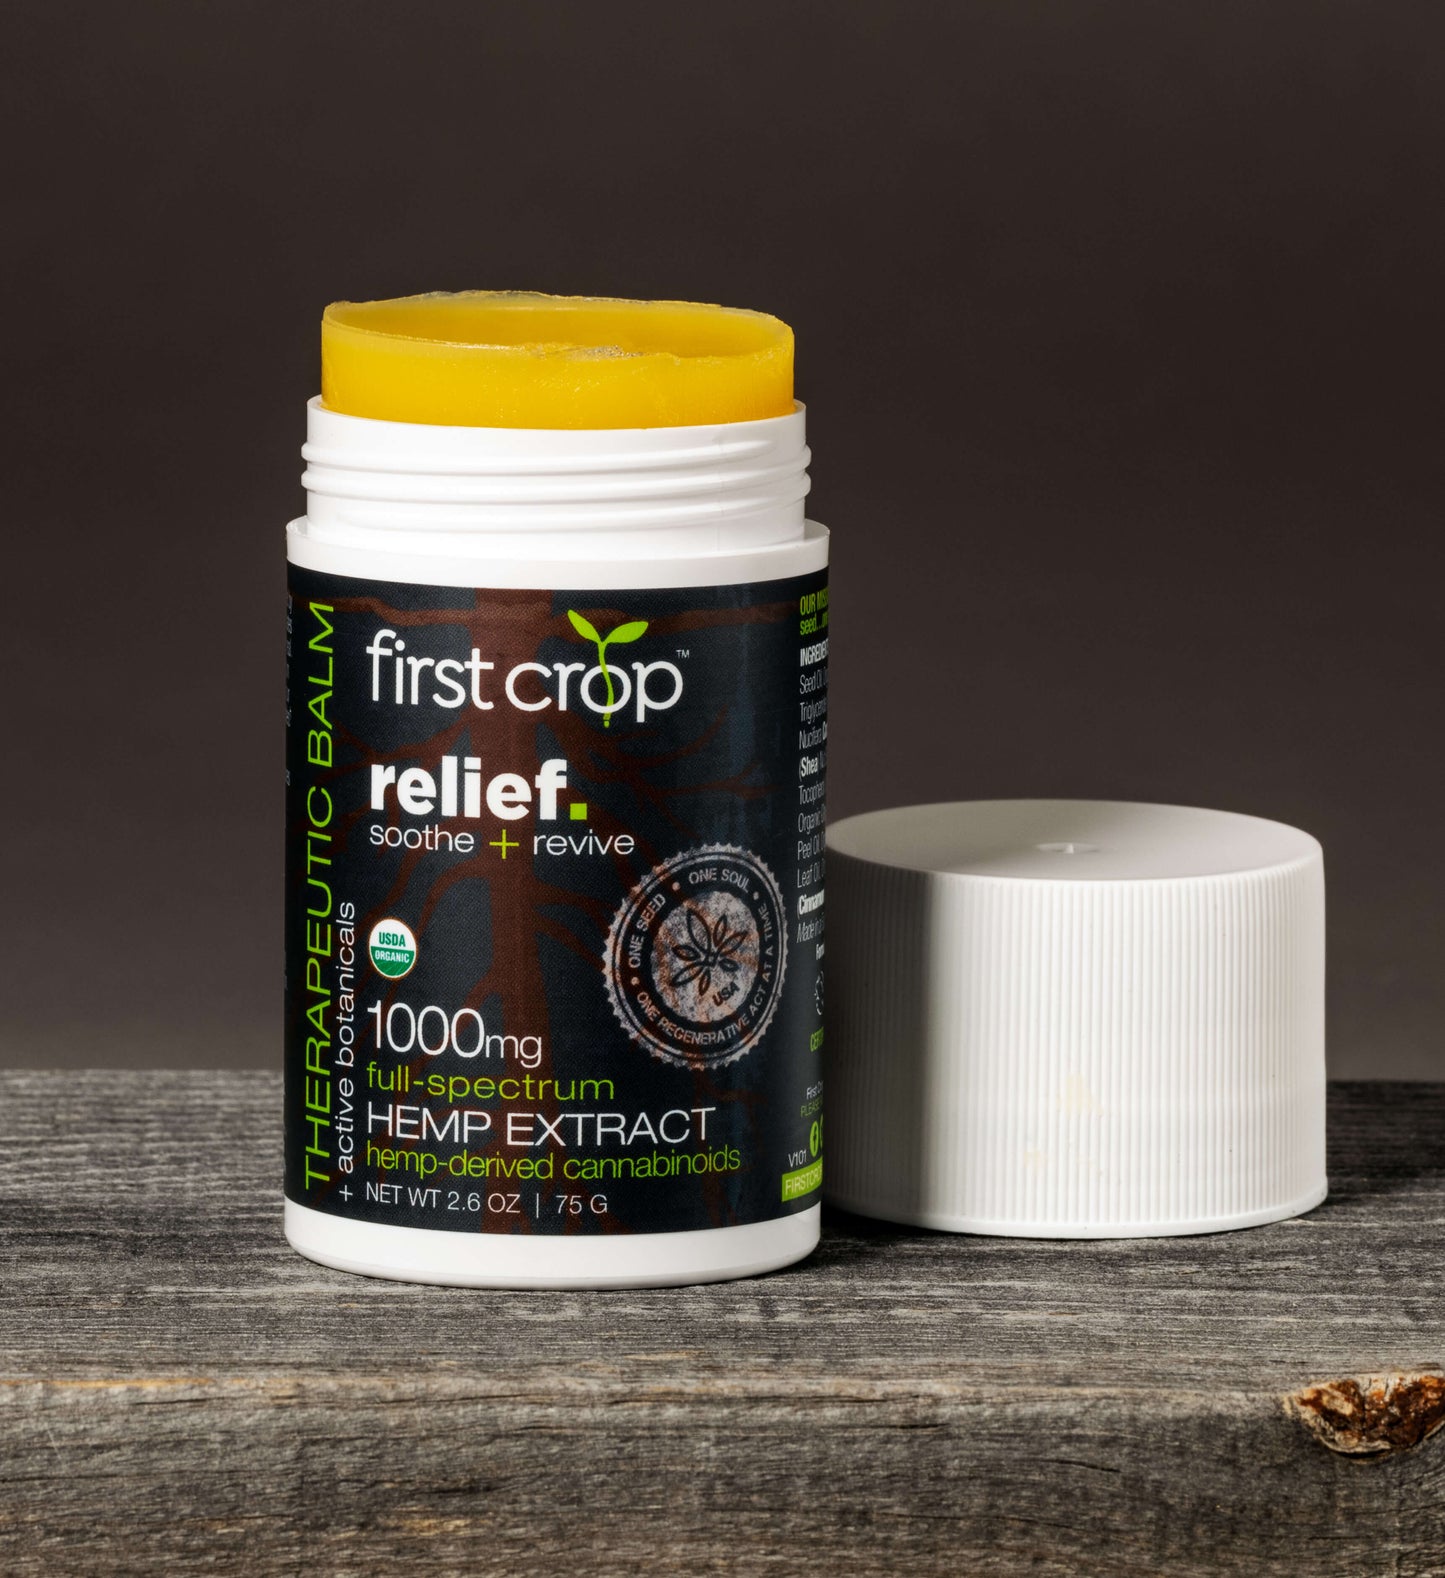 First Crop Relief Therapeutic Balm - 1000mg (a Balm) made by First Crop sold at CBD Emporium